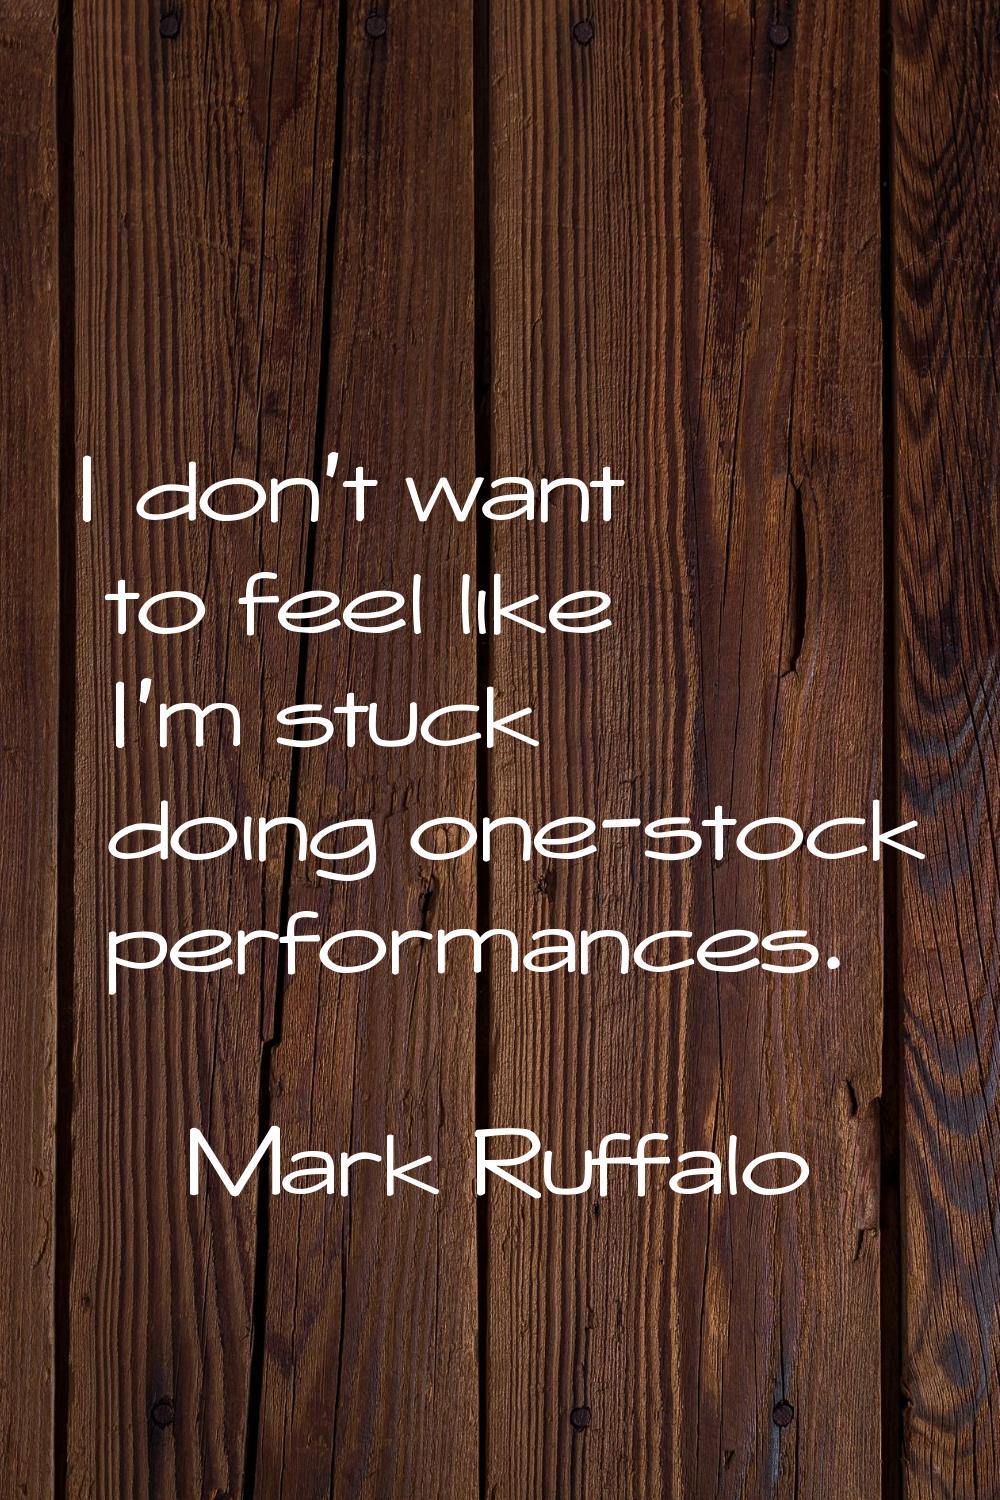 I don't want to feel like I'm stuck doing one-stock performances.